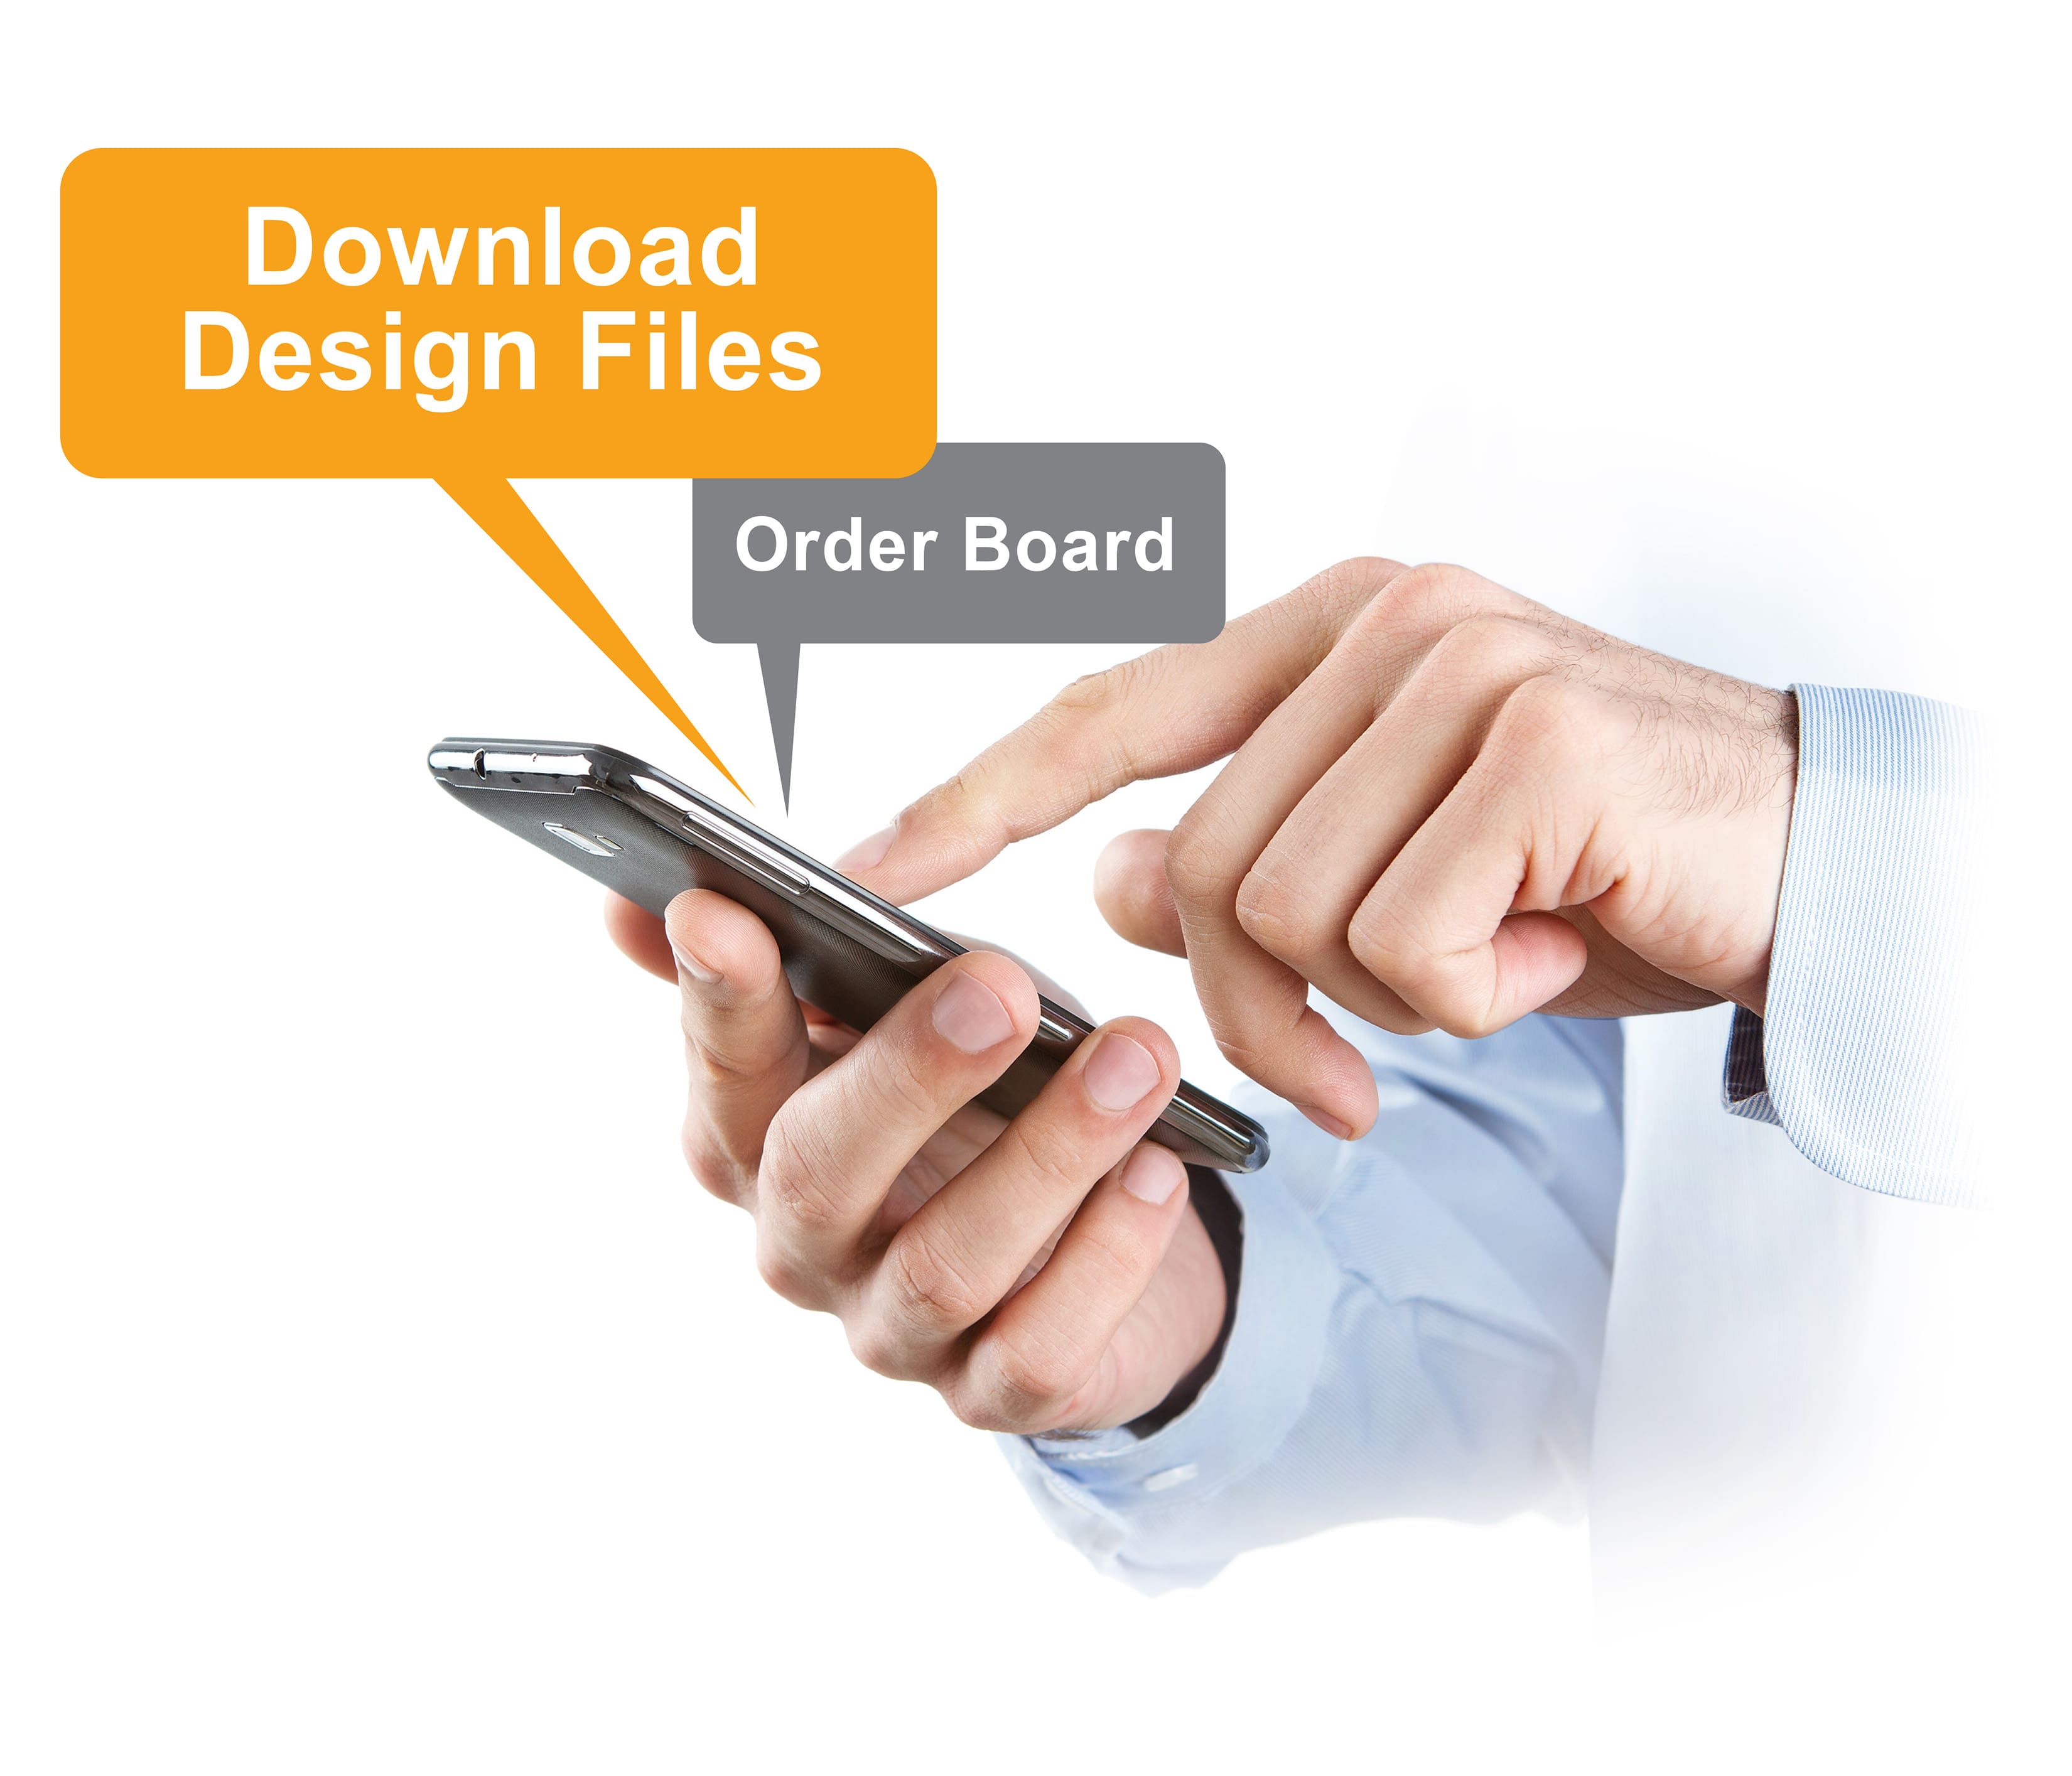 Downloading design files and ordering RF boards